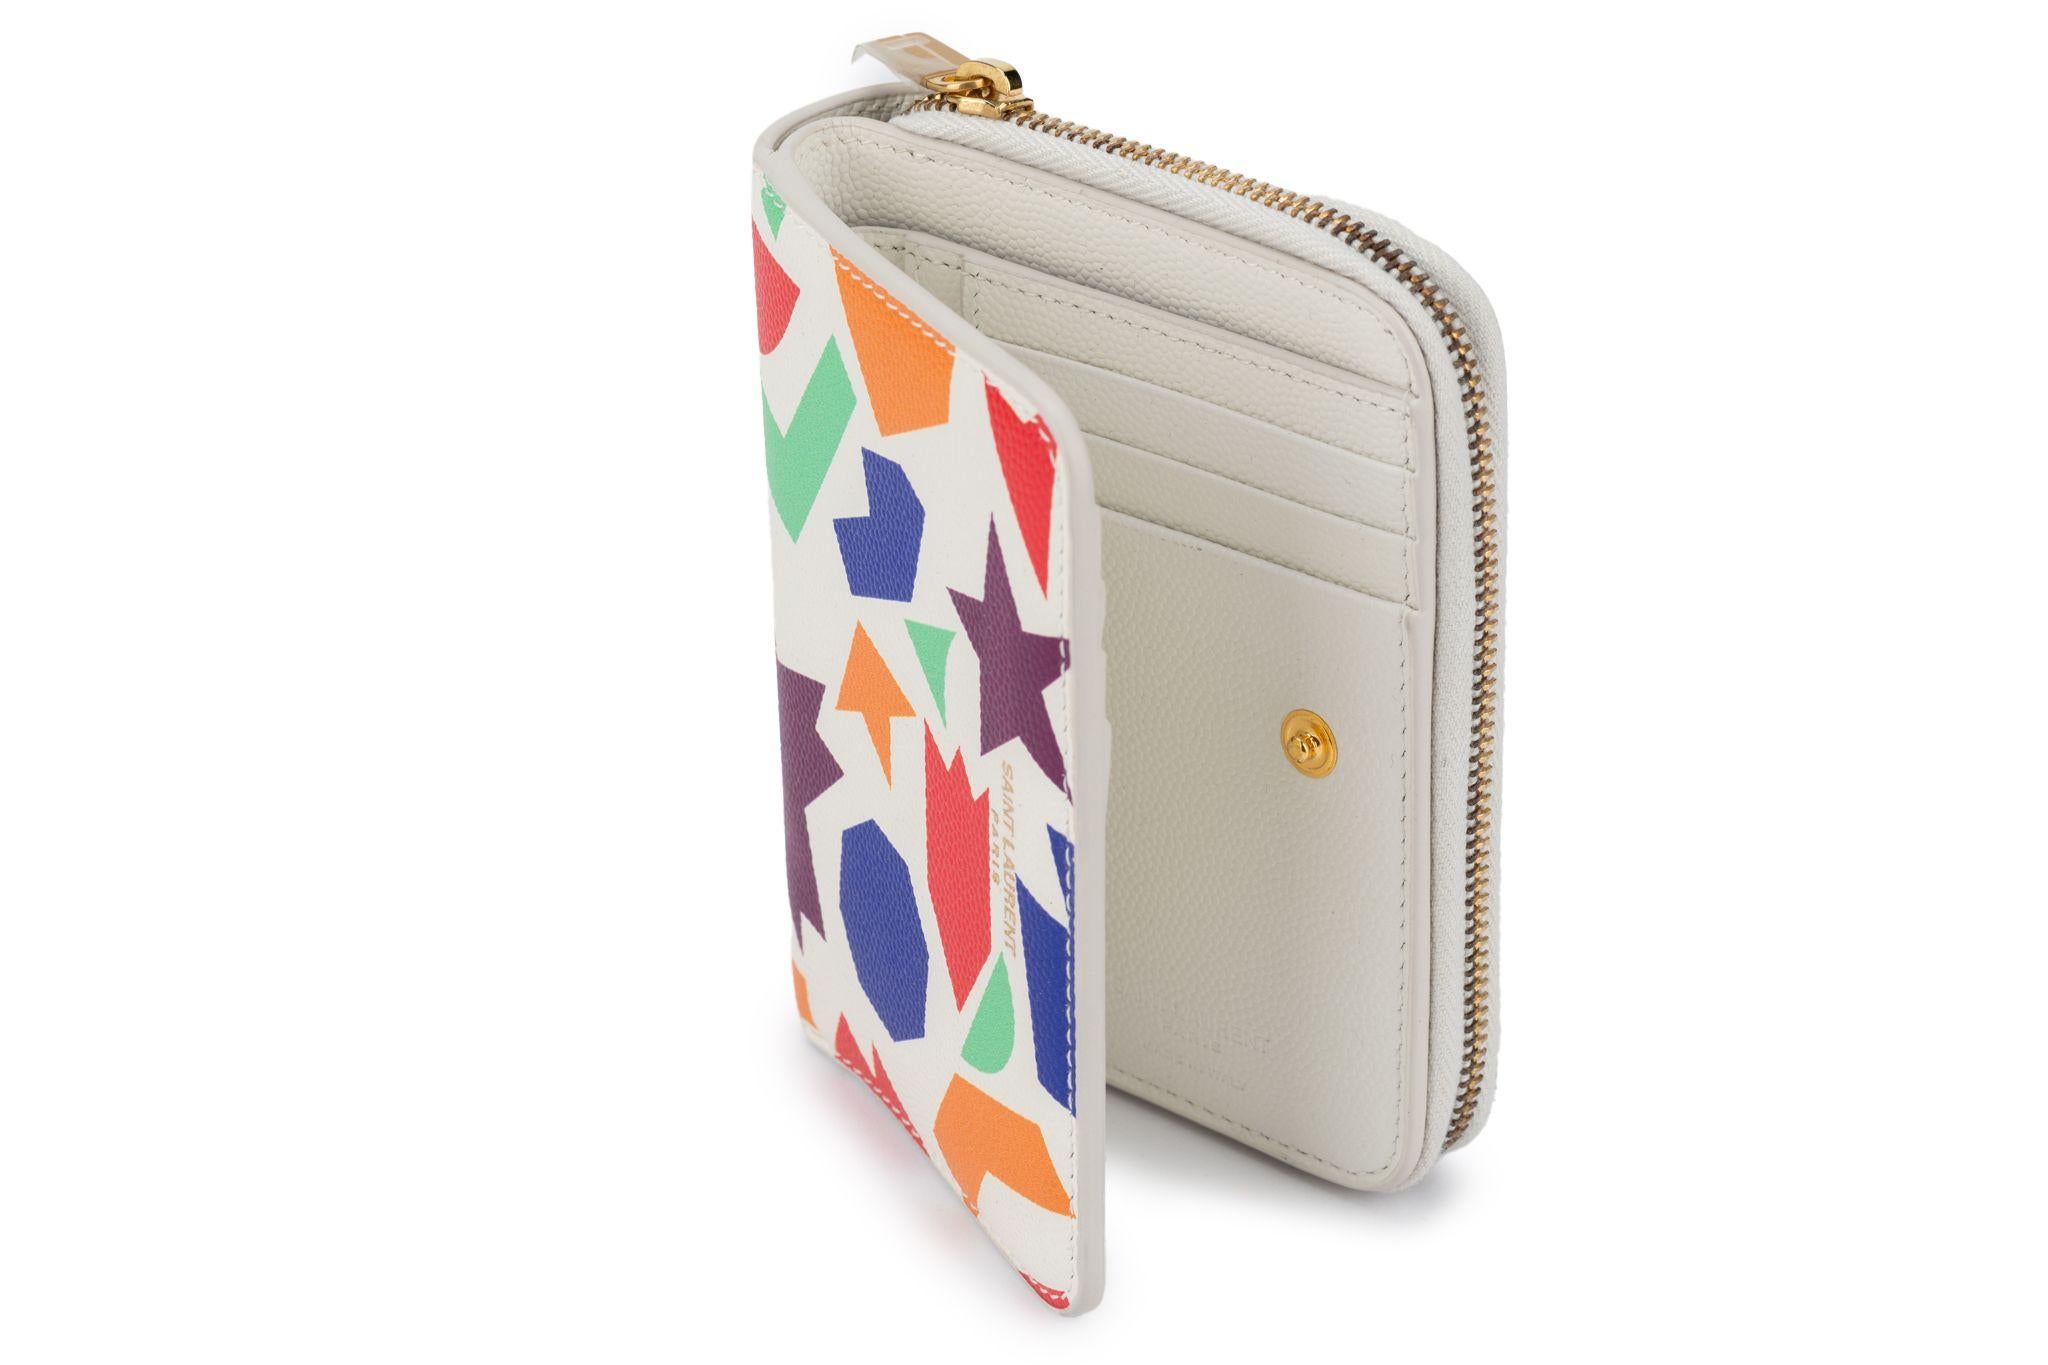 YSL new grained leather zip wallet with multicolor geometric design. Bifold, with credit card slots and zipped coin compartment.
Comes with booklet, original dustcover and box.